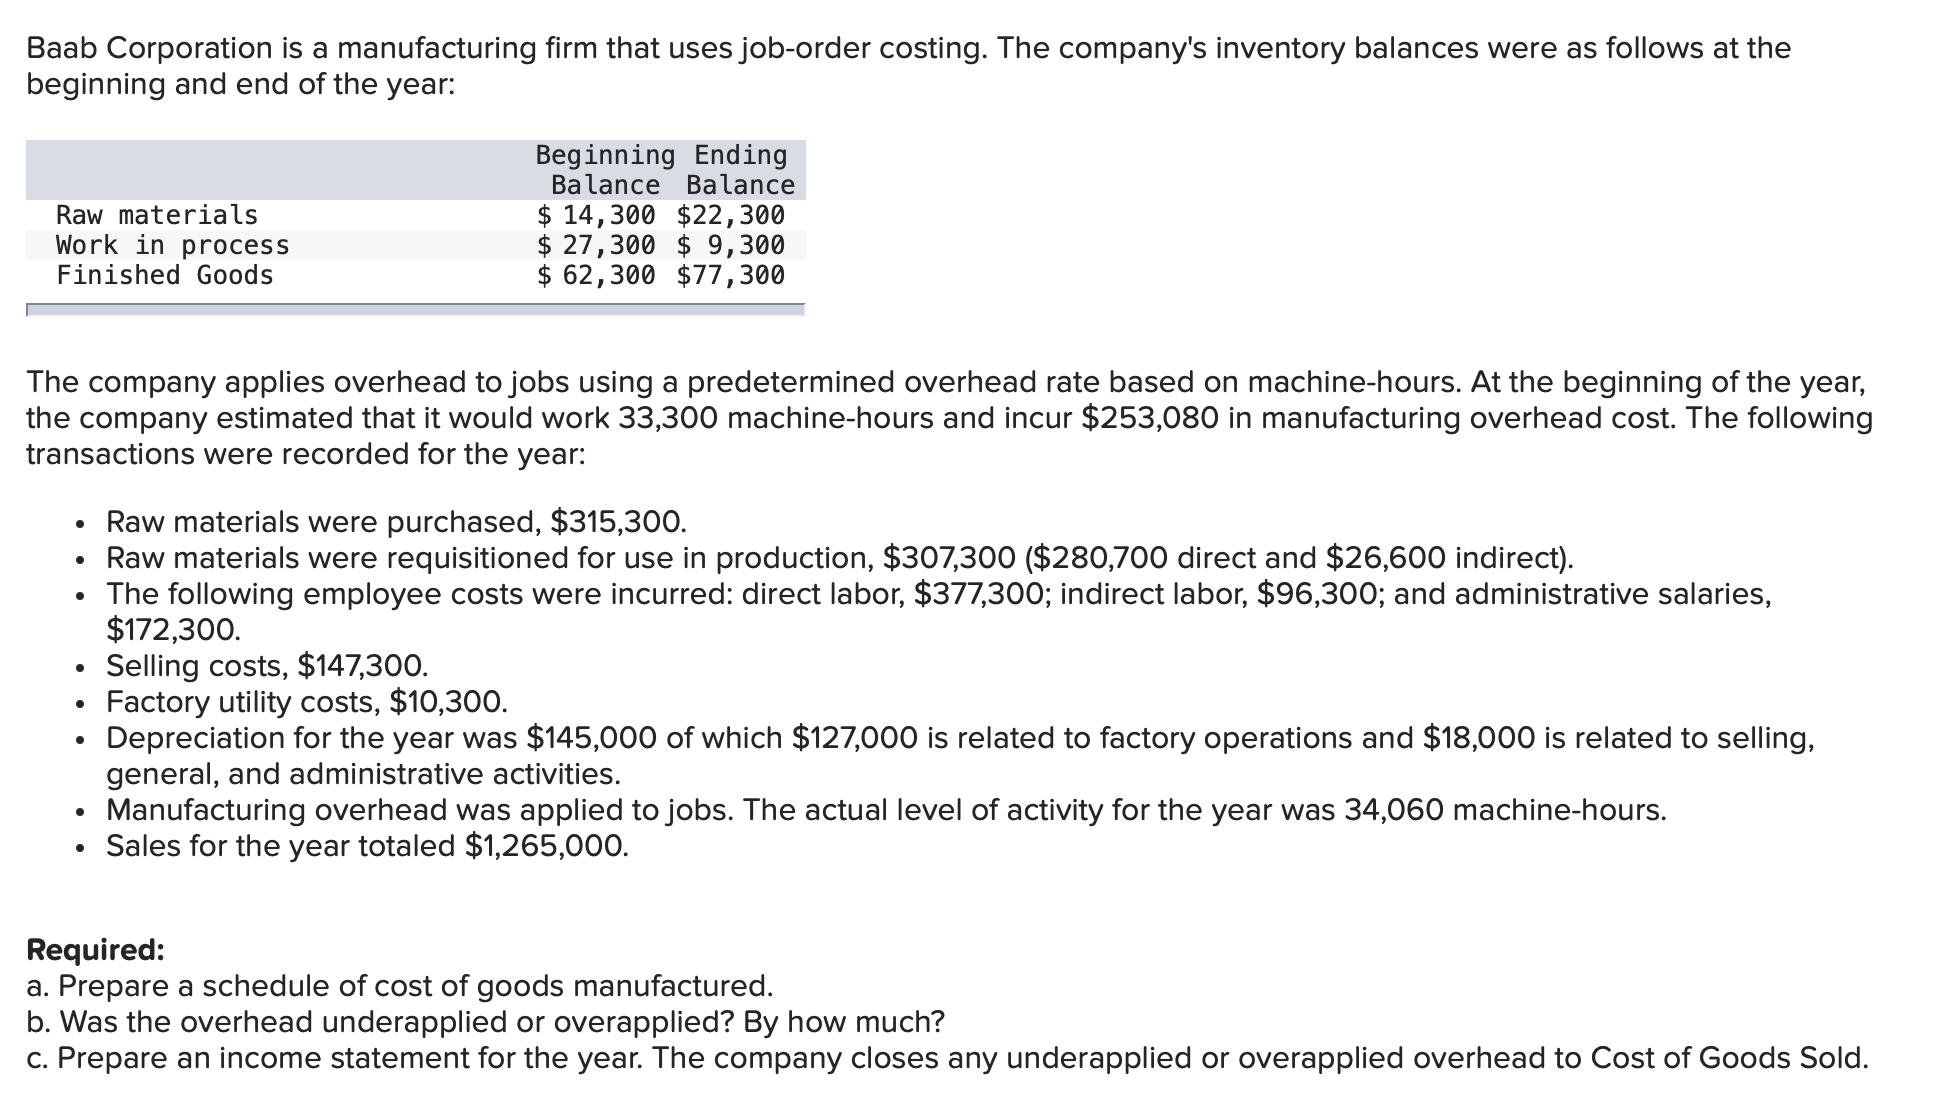 Baab Corporation is a manufacturing firm that uses job-order costing. The company's inventory balances were